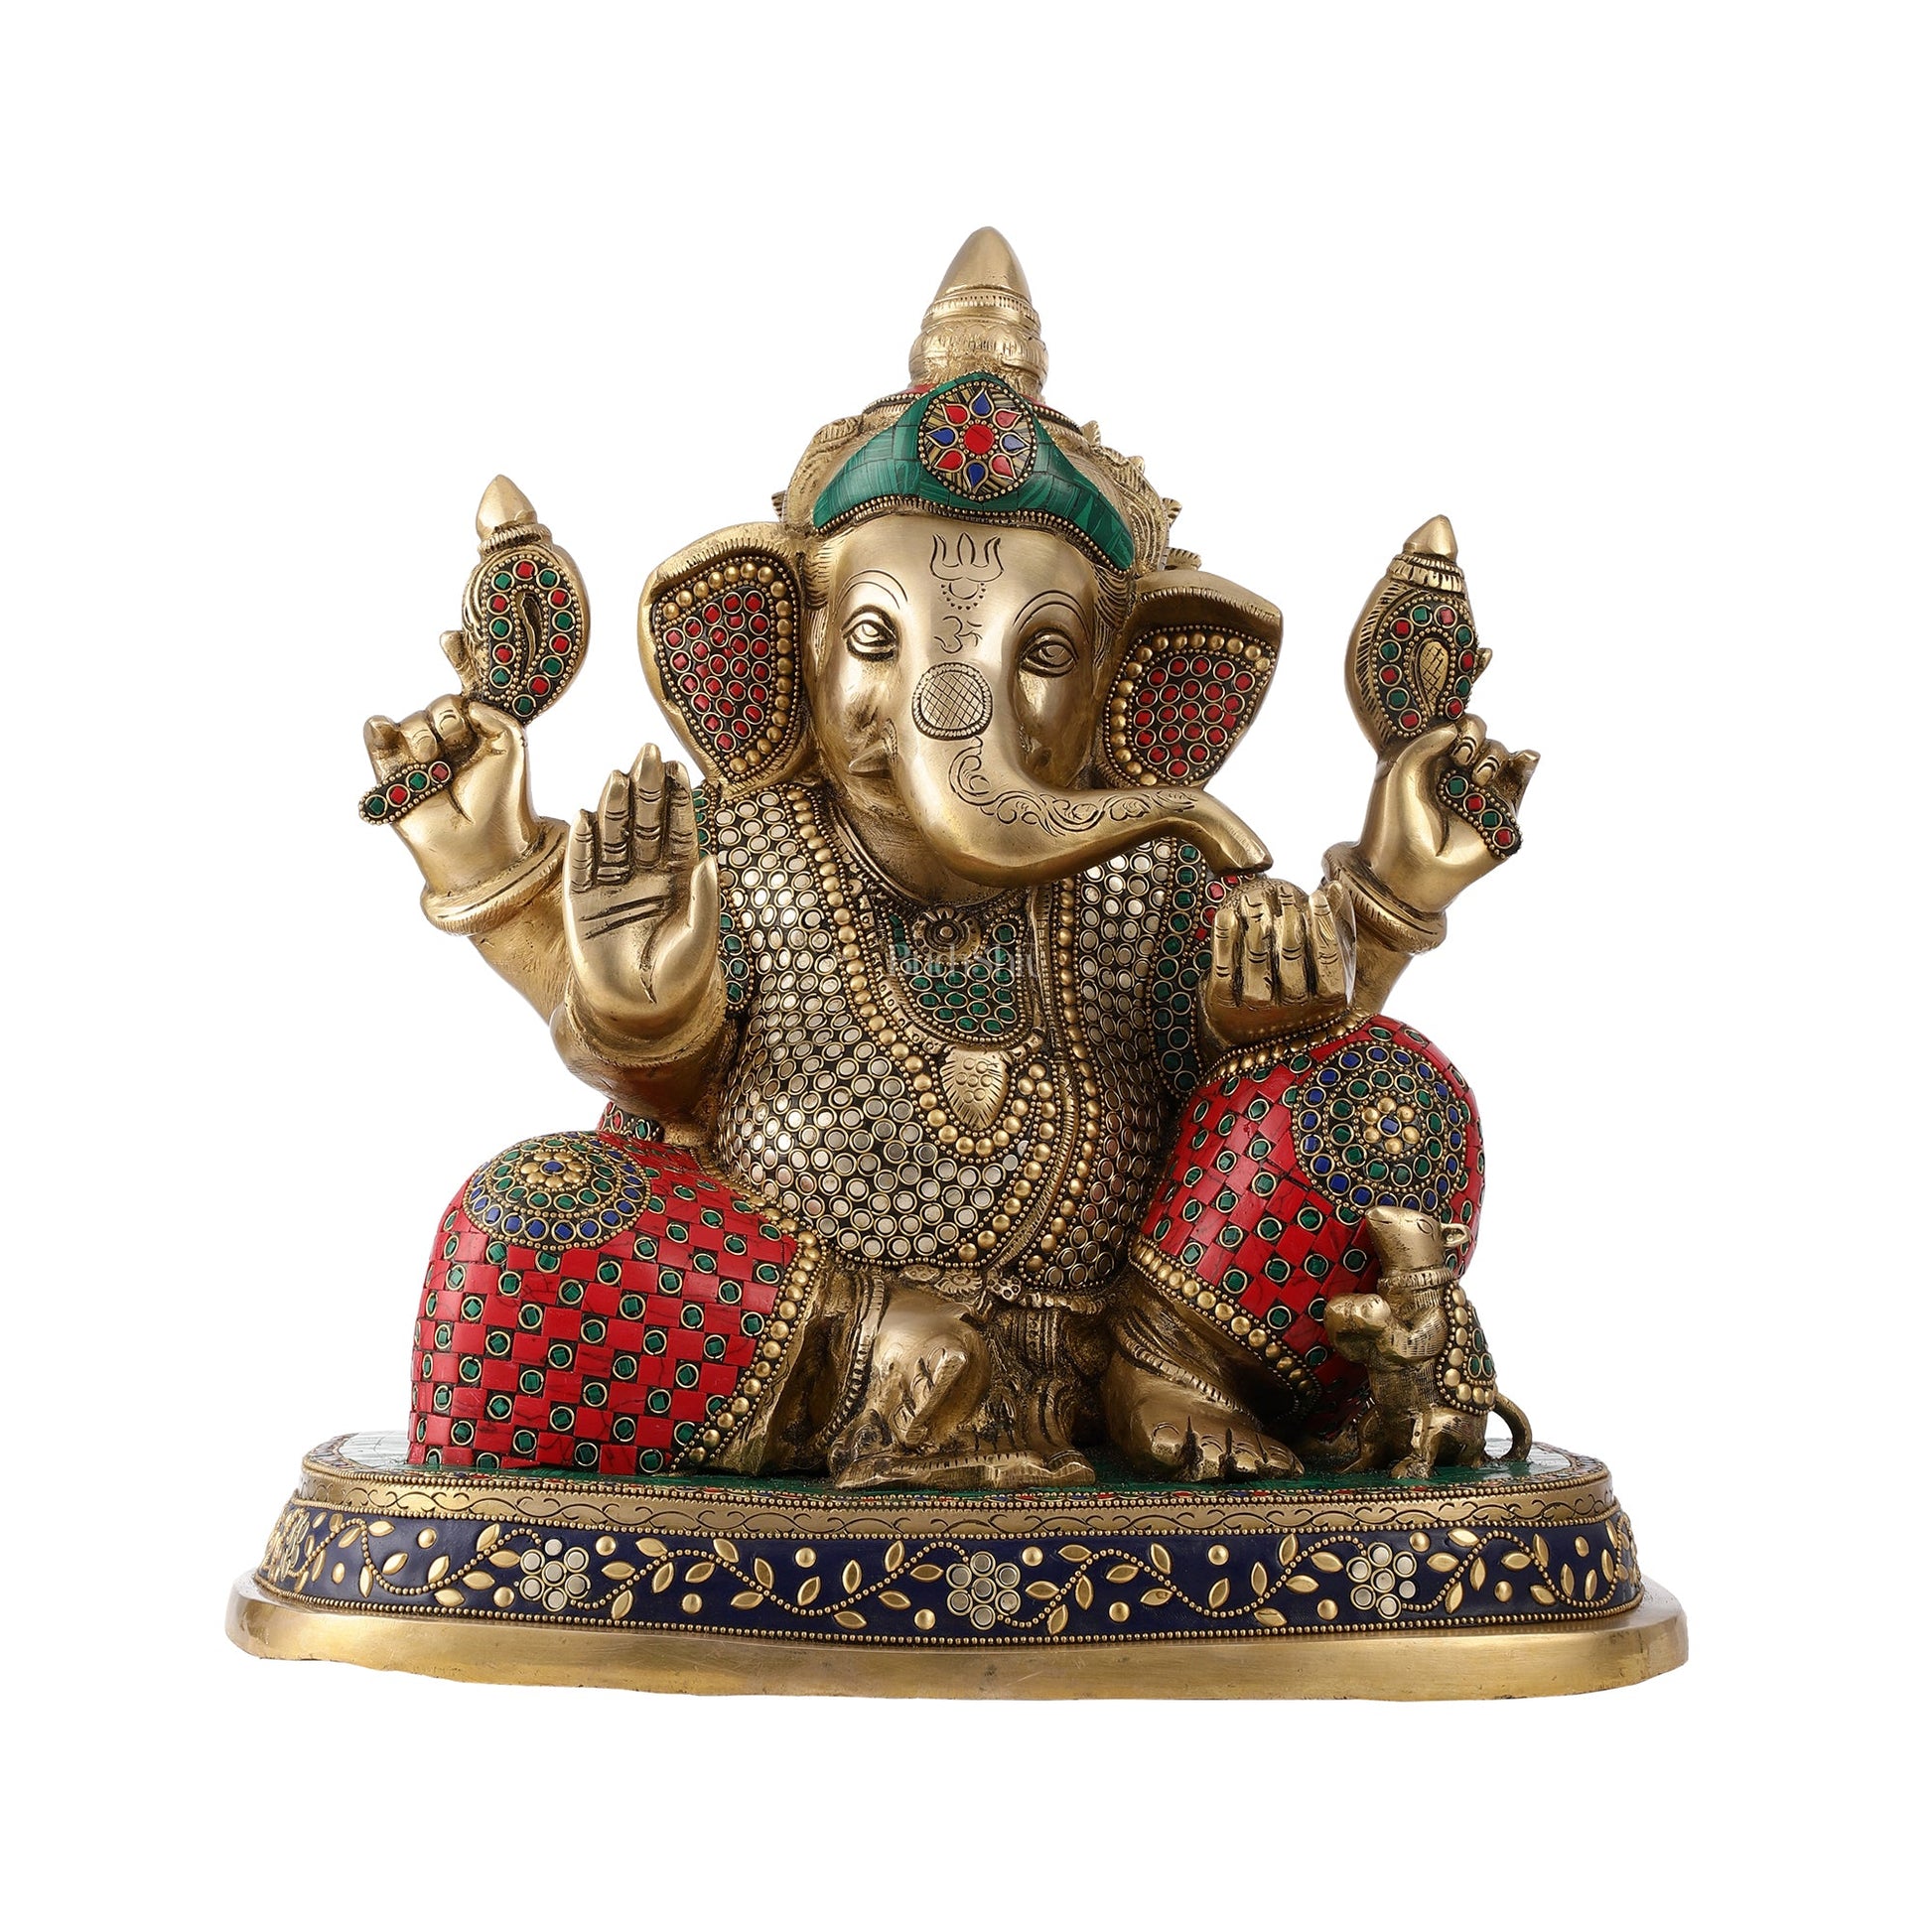 Pure Brass Handcrafted Lord Ganesha Statue - 16 inch - Budhshiv.com